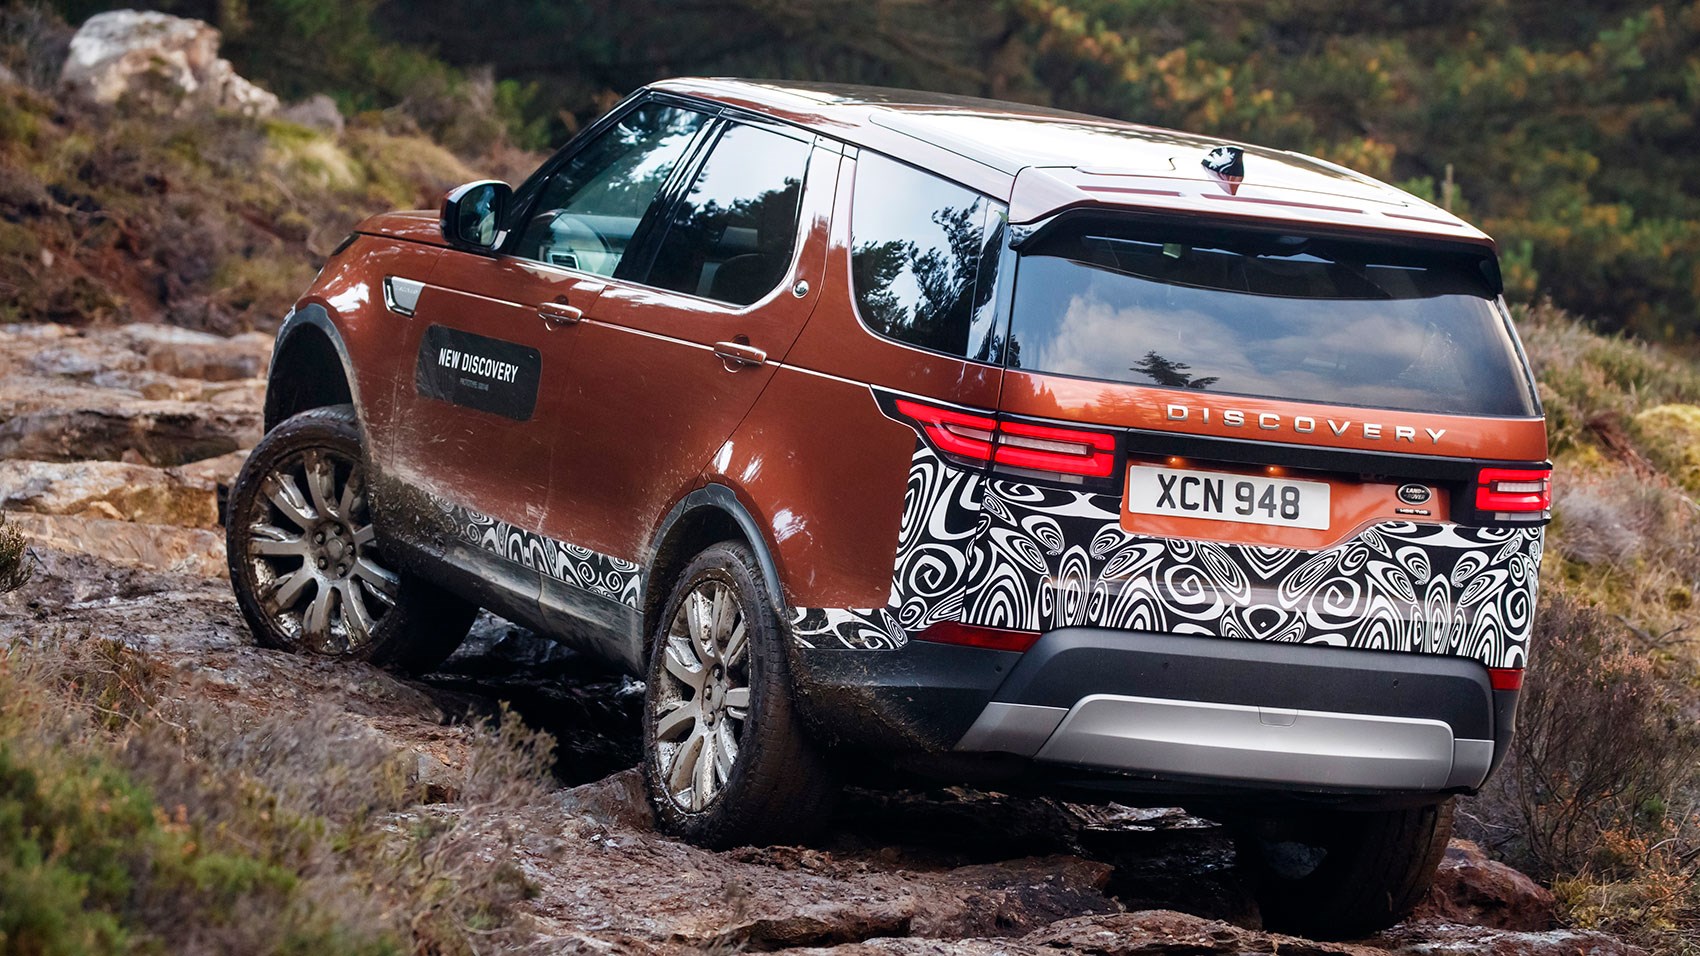 Вине дискавери. Land Rover Discovery 5. Ленд Ровер Дискавери 2017. Ленд Ровер Дискавери 5 поколения. Land Rover Discovery 5 Offroad.